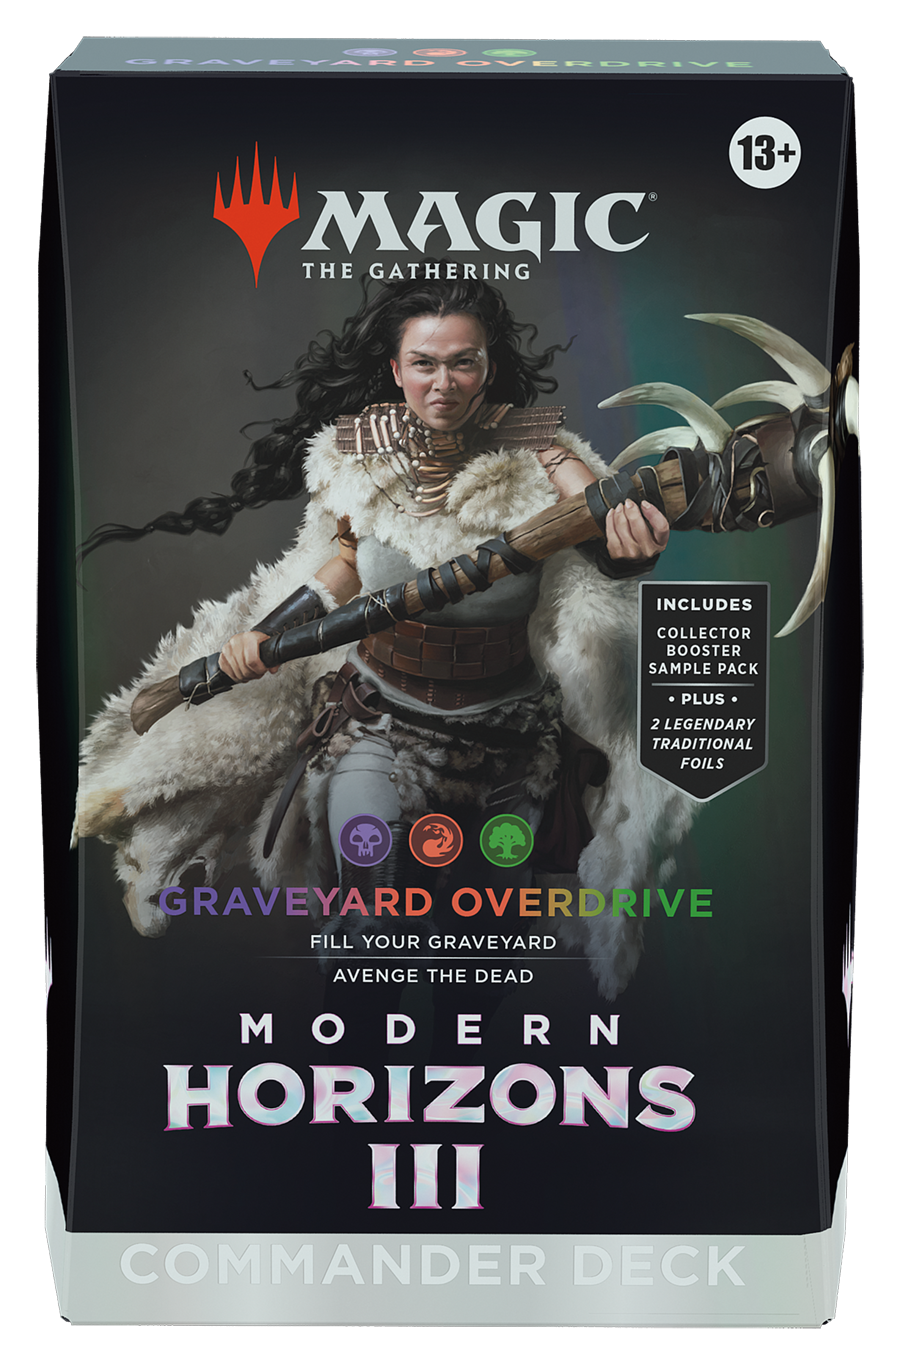 Magic: The Gathering Modern Horizons 3 Commander Deck - Graveyard Overdrive - PREORDER - Expected 6/12